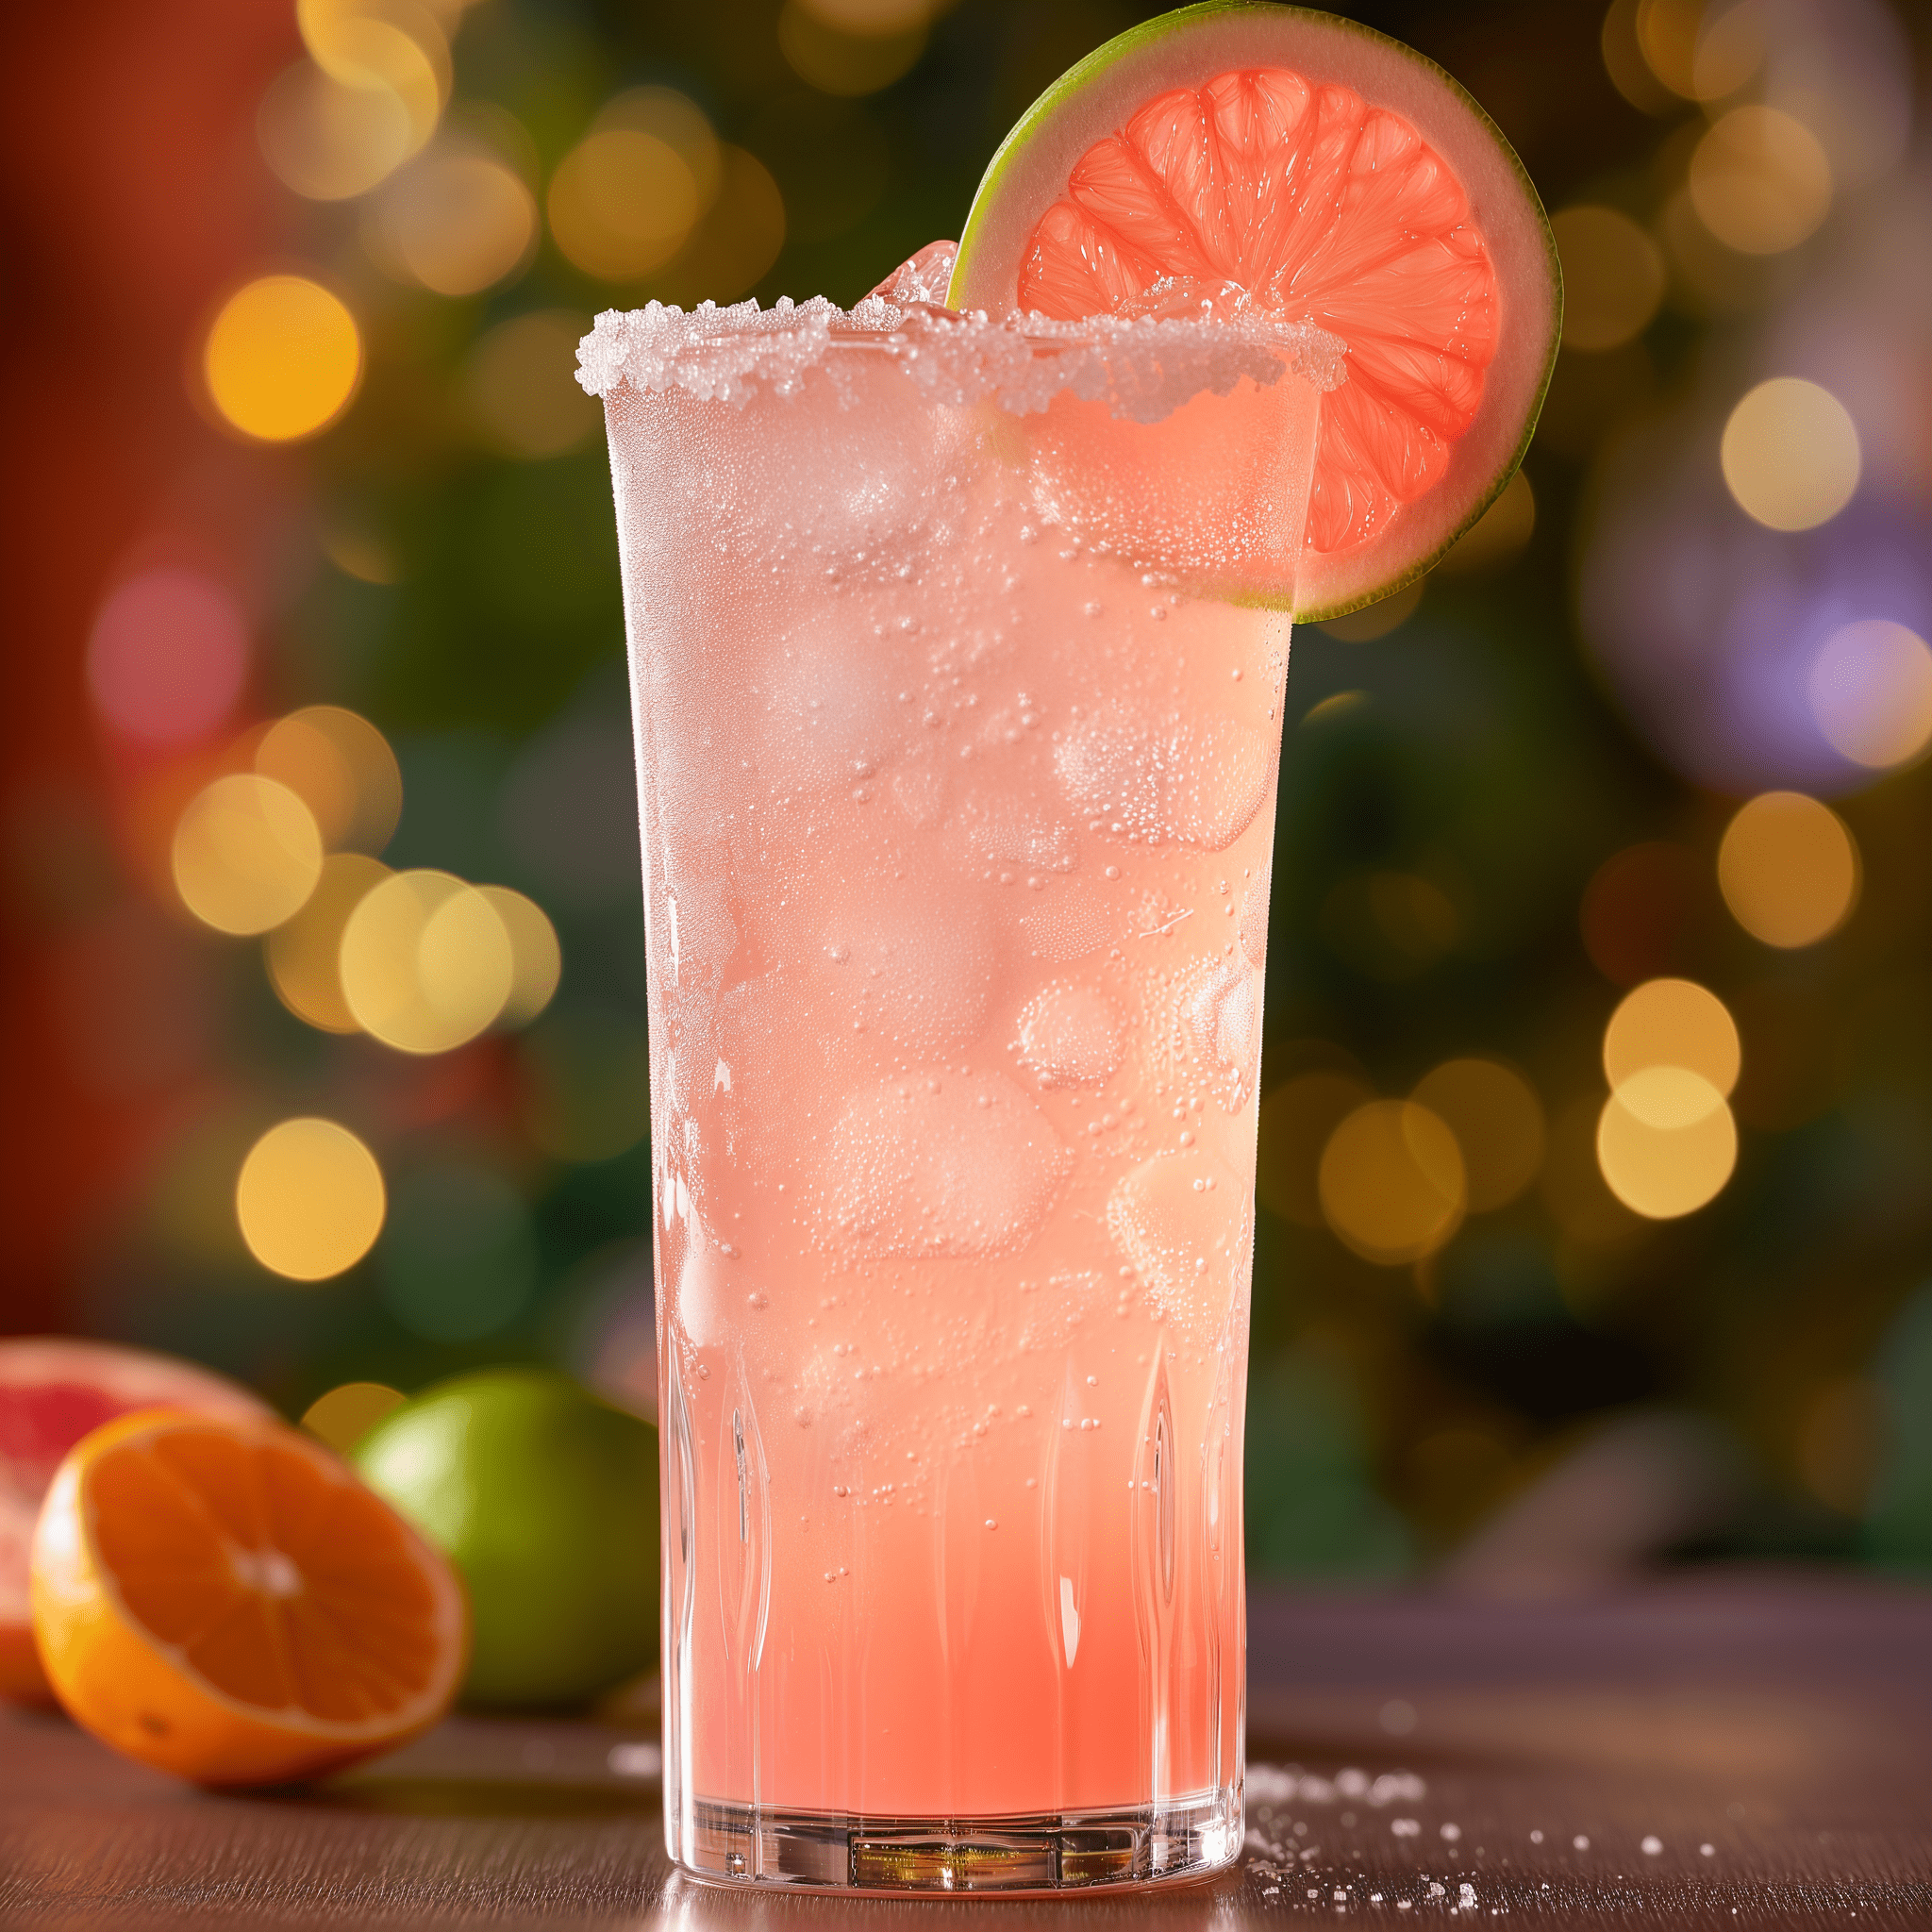 Paloma Mocktail Recipe - The Paloma Mocktail has a refreshing, slightly tart grapefruit flavor with a sweet undertone. It's fizzy, light, and thirst-quenching, with a subtle hint of salt that enhances the citrus notes.